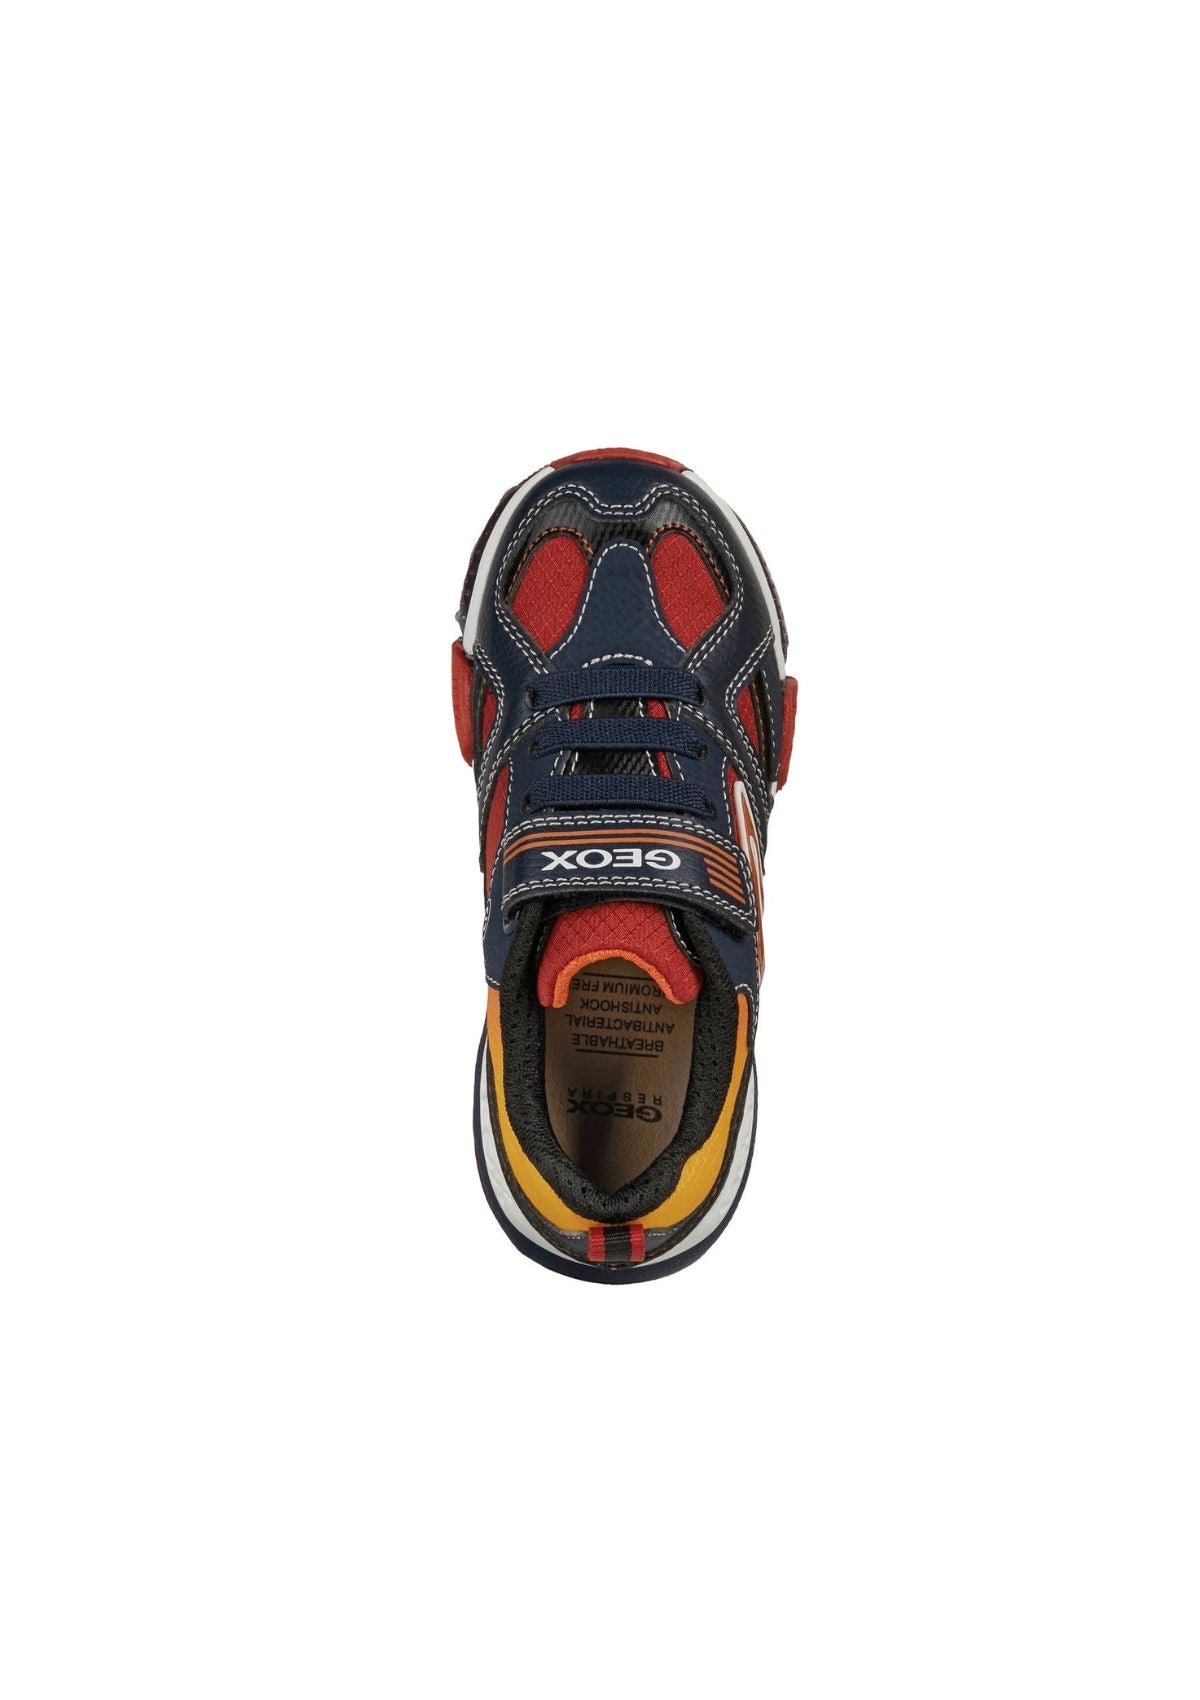 Geox Junior Boys Trainers BAYONYC Lights-Up Navy Red